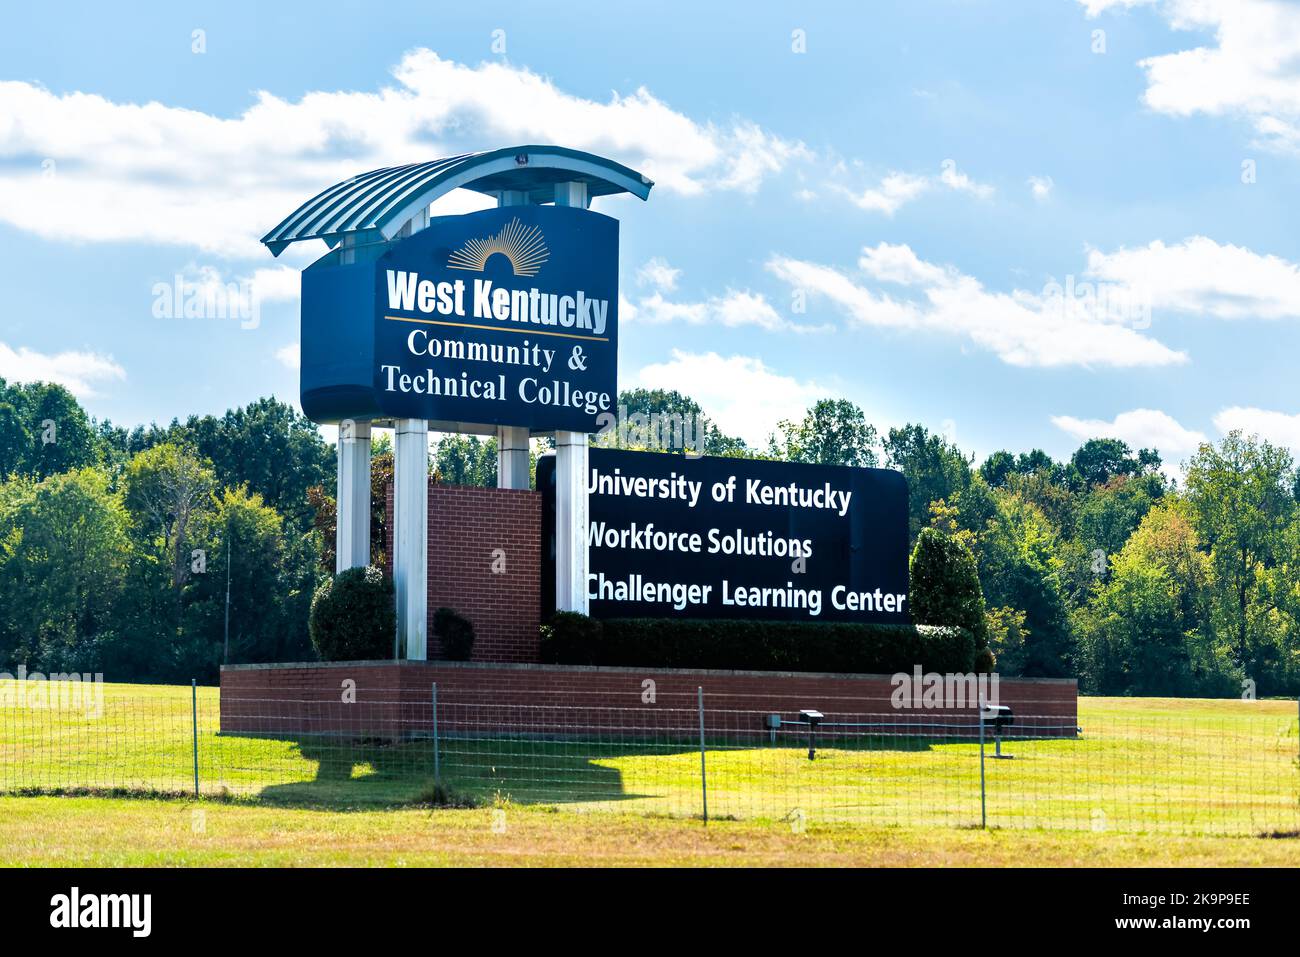 Paducah, USA - October 16, 2019: West Kentucky community technical college from University of Kentucky education system sign Stock Photo